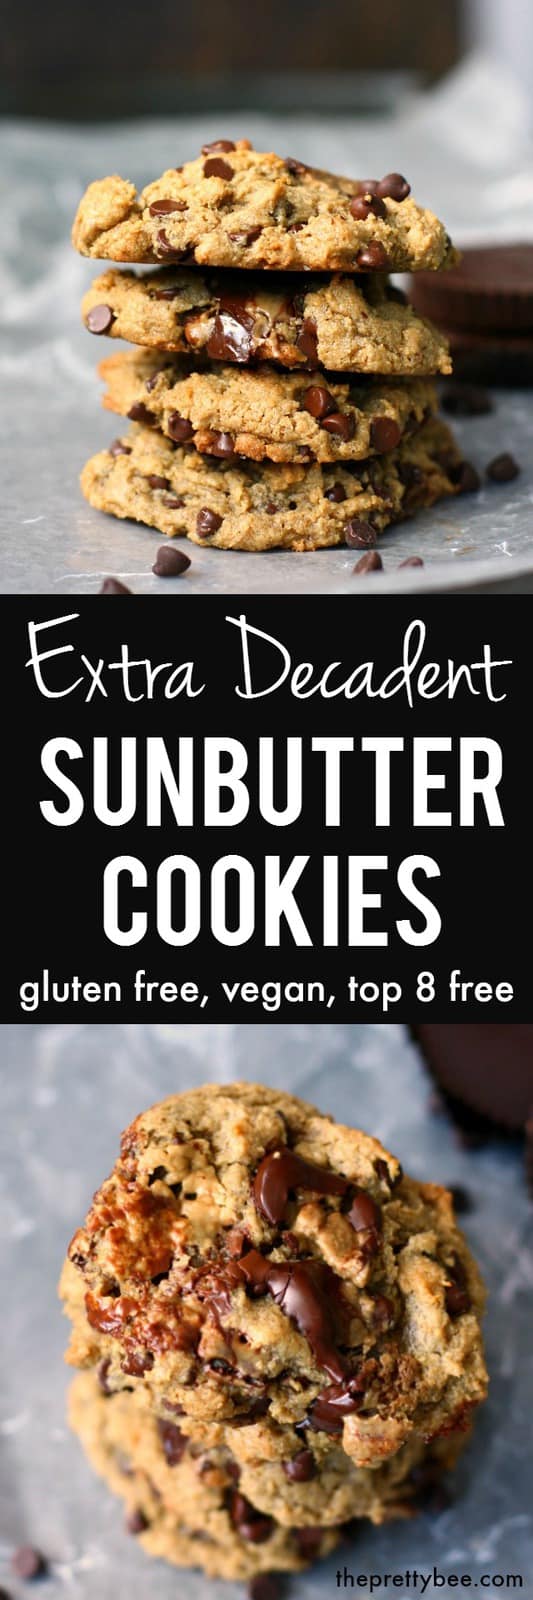 Chewy, gooey, chocolatey and delicious sunbutter cookies are made extra special with the additon of chocolate chips and sun cups.